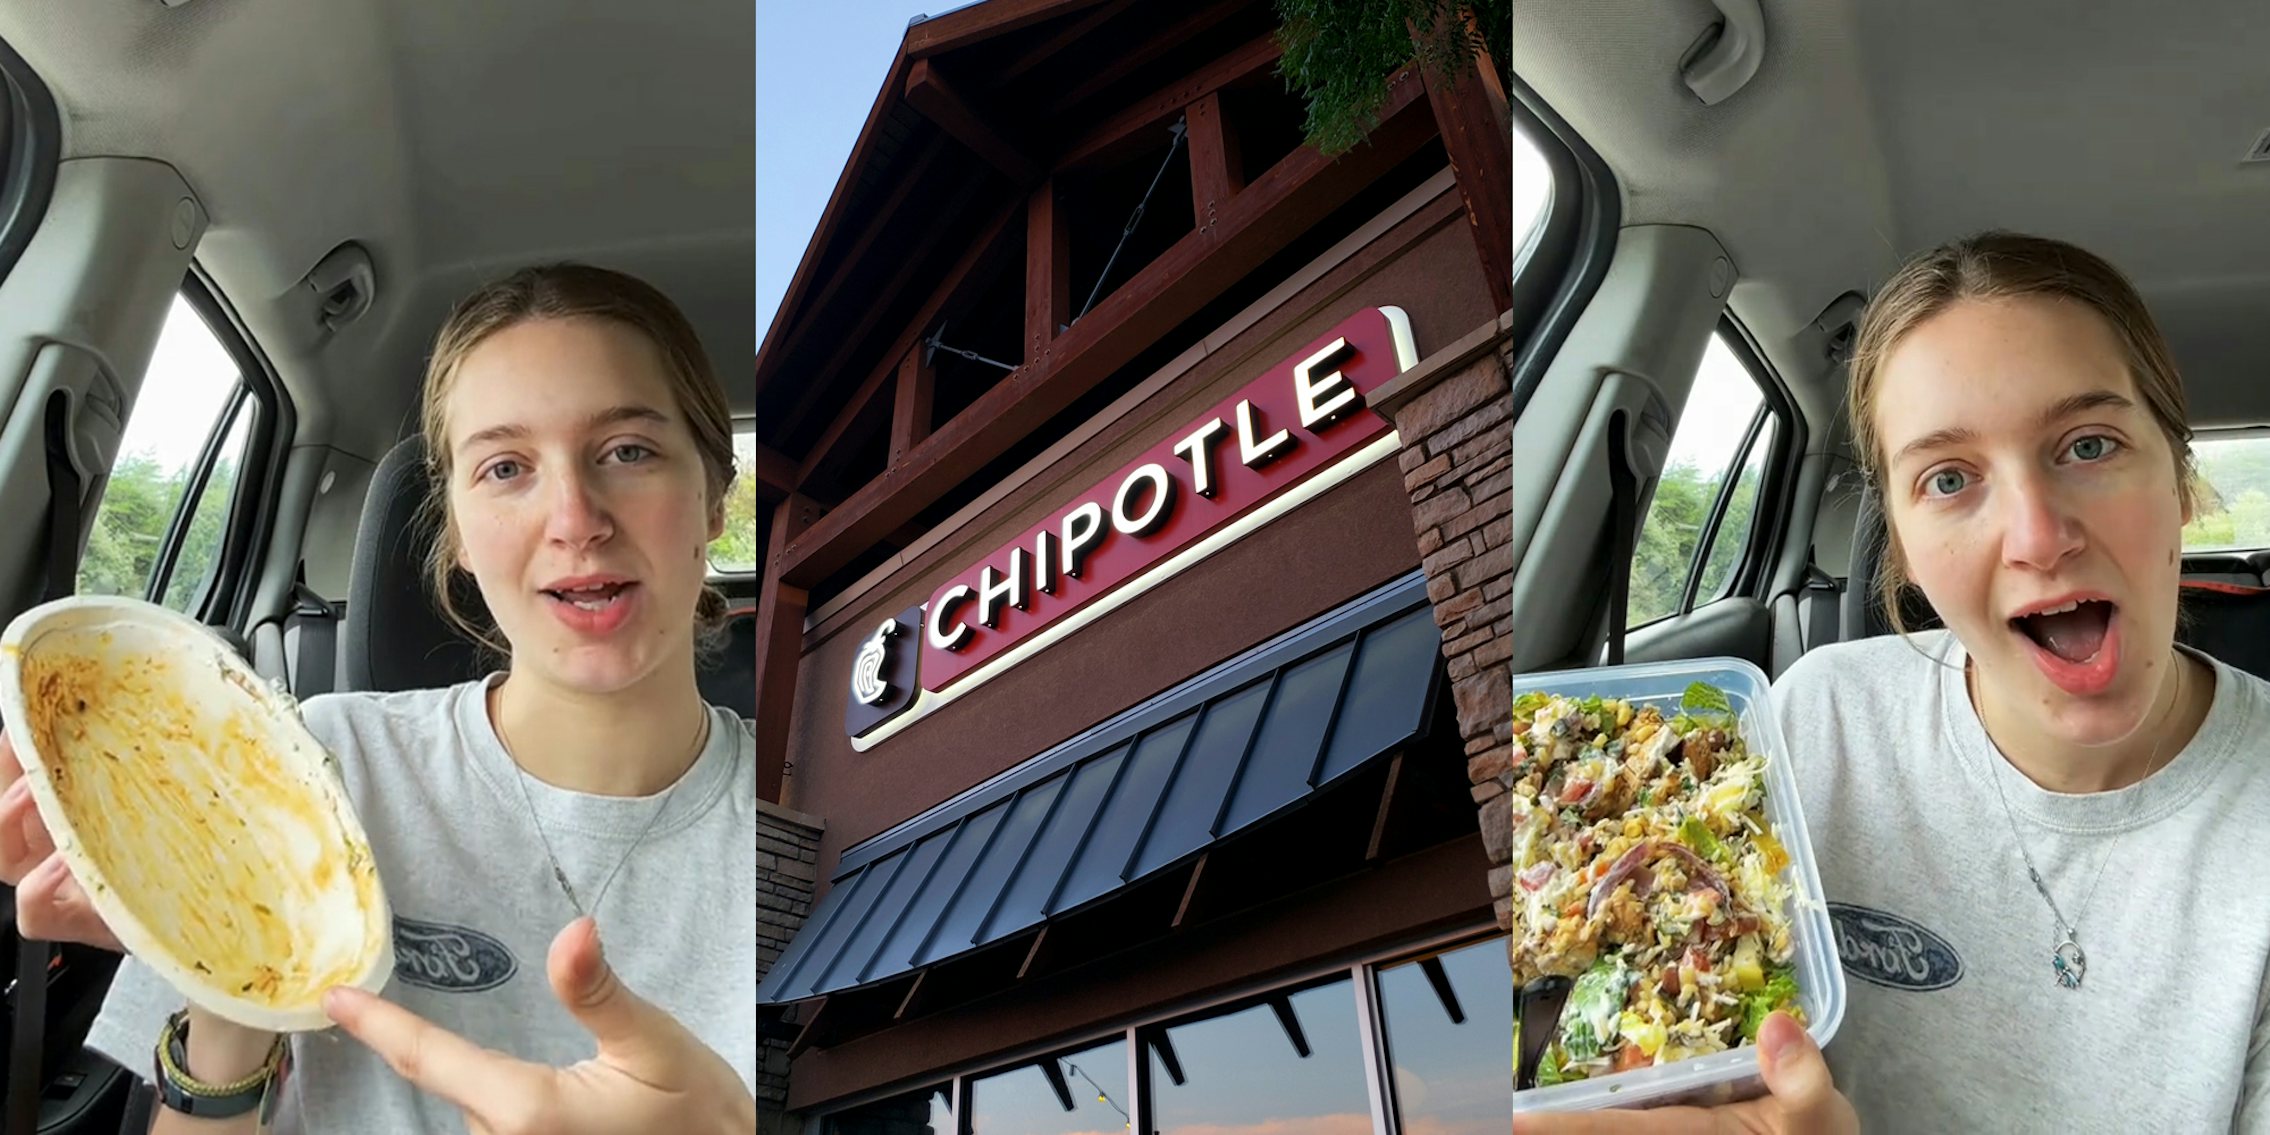 Chipotle customer speaking in car holding empty food container (l) Chipotle building with sign (c) Chipotle customer speaking in car holding large container filled with food (r)